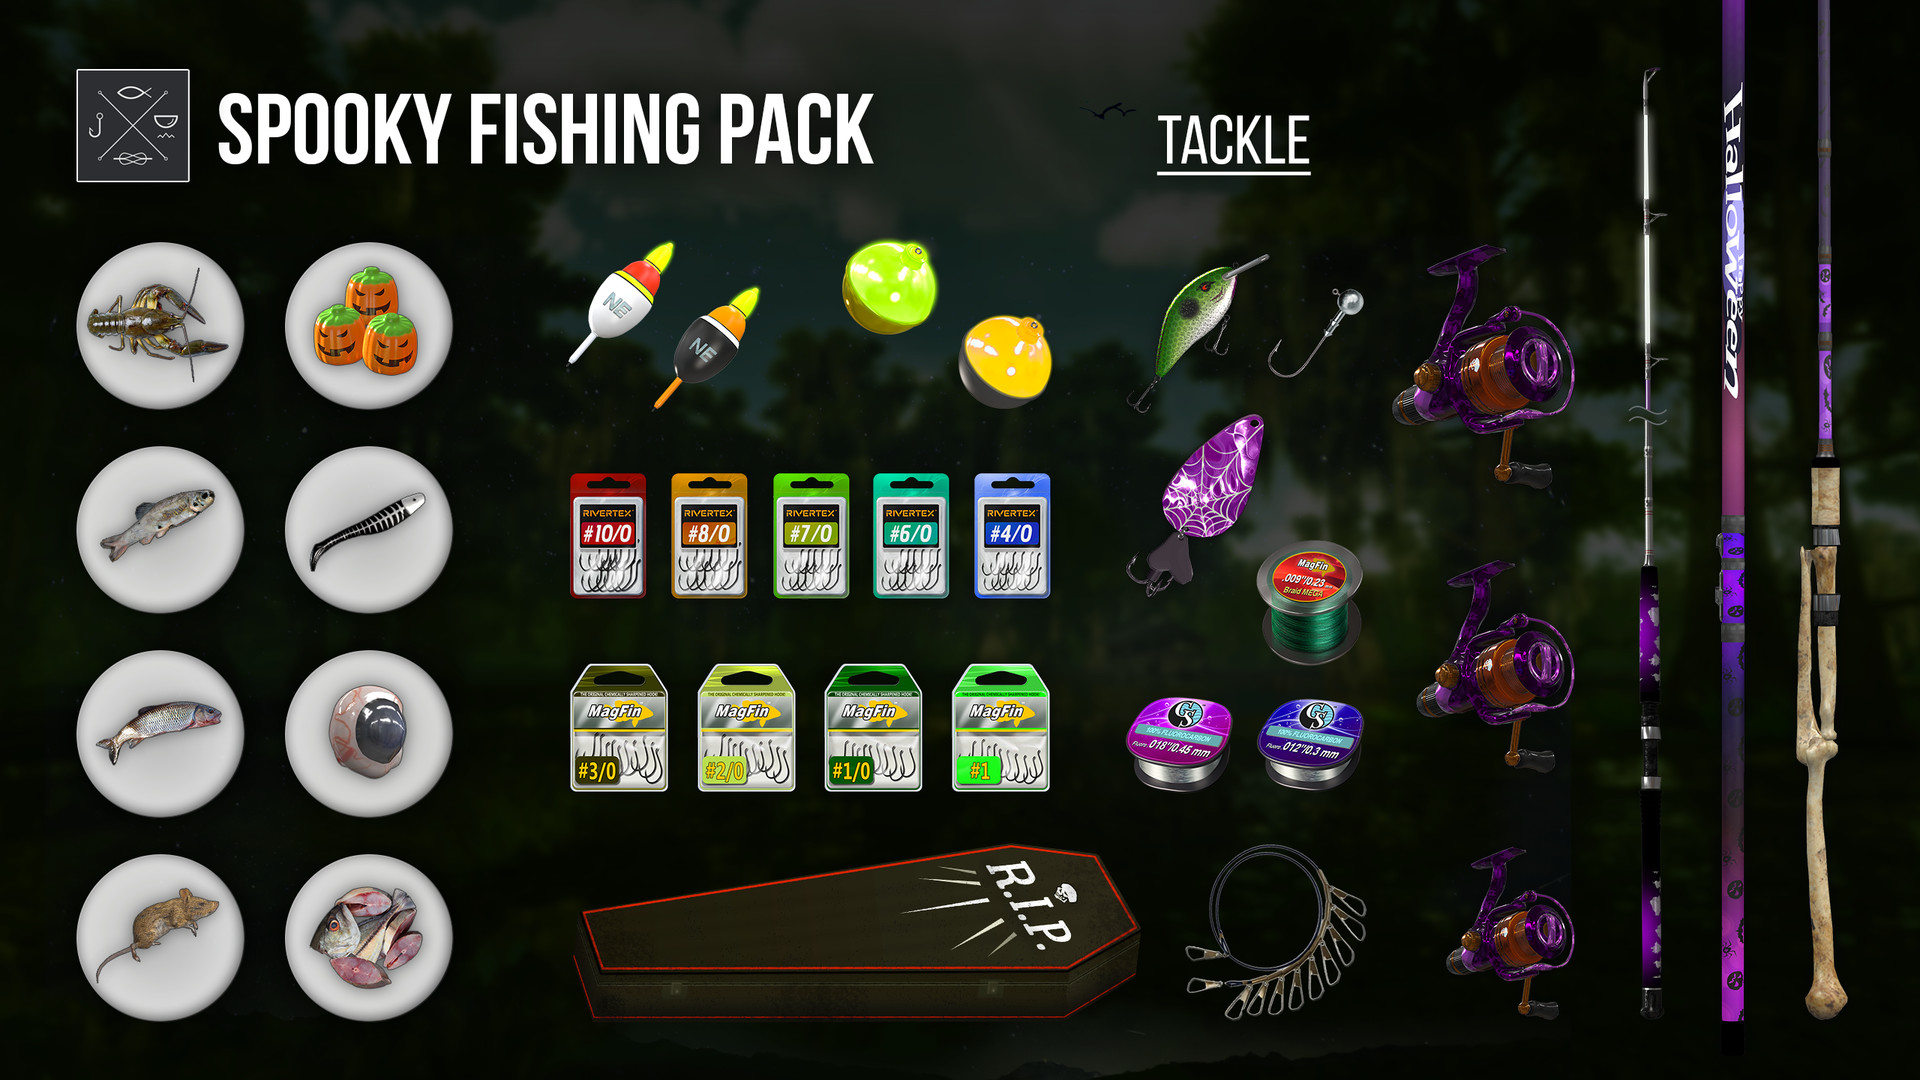 Fishing Planet: Sport Outfit Pack on Steam